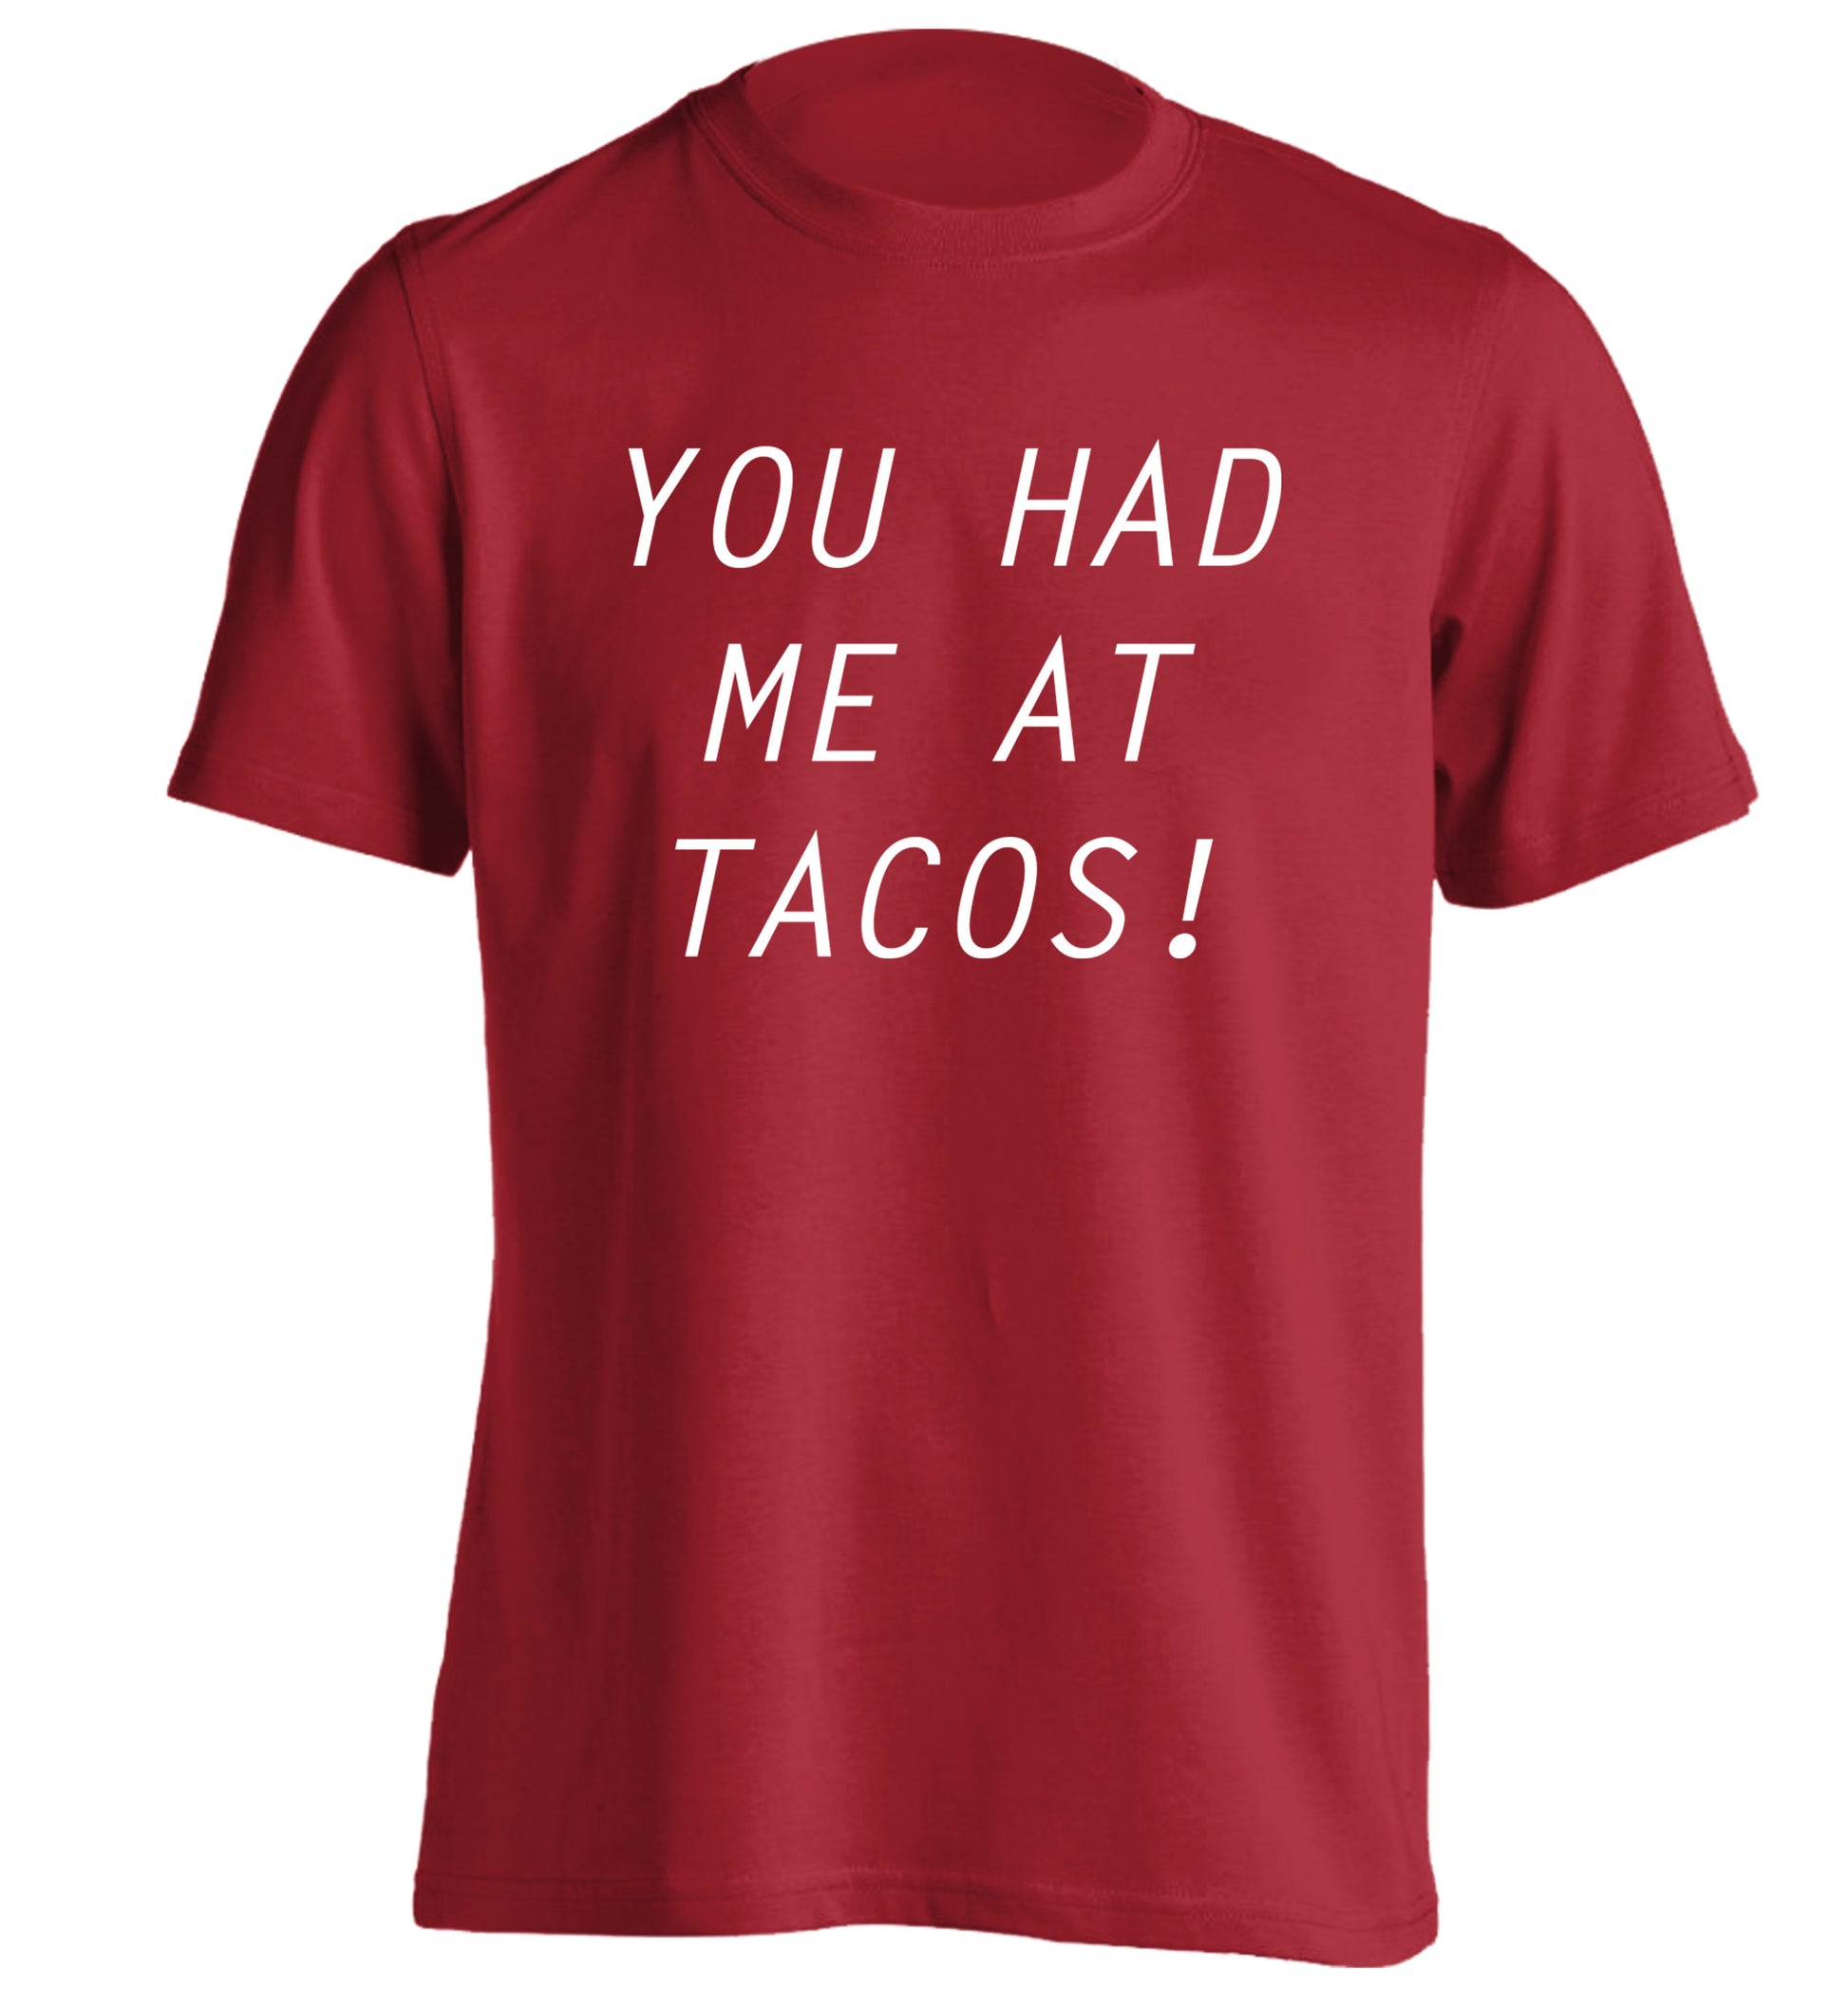 You had me at tacos adults unisex red Tshirt 2XL